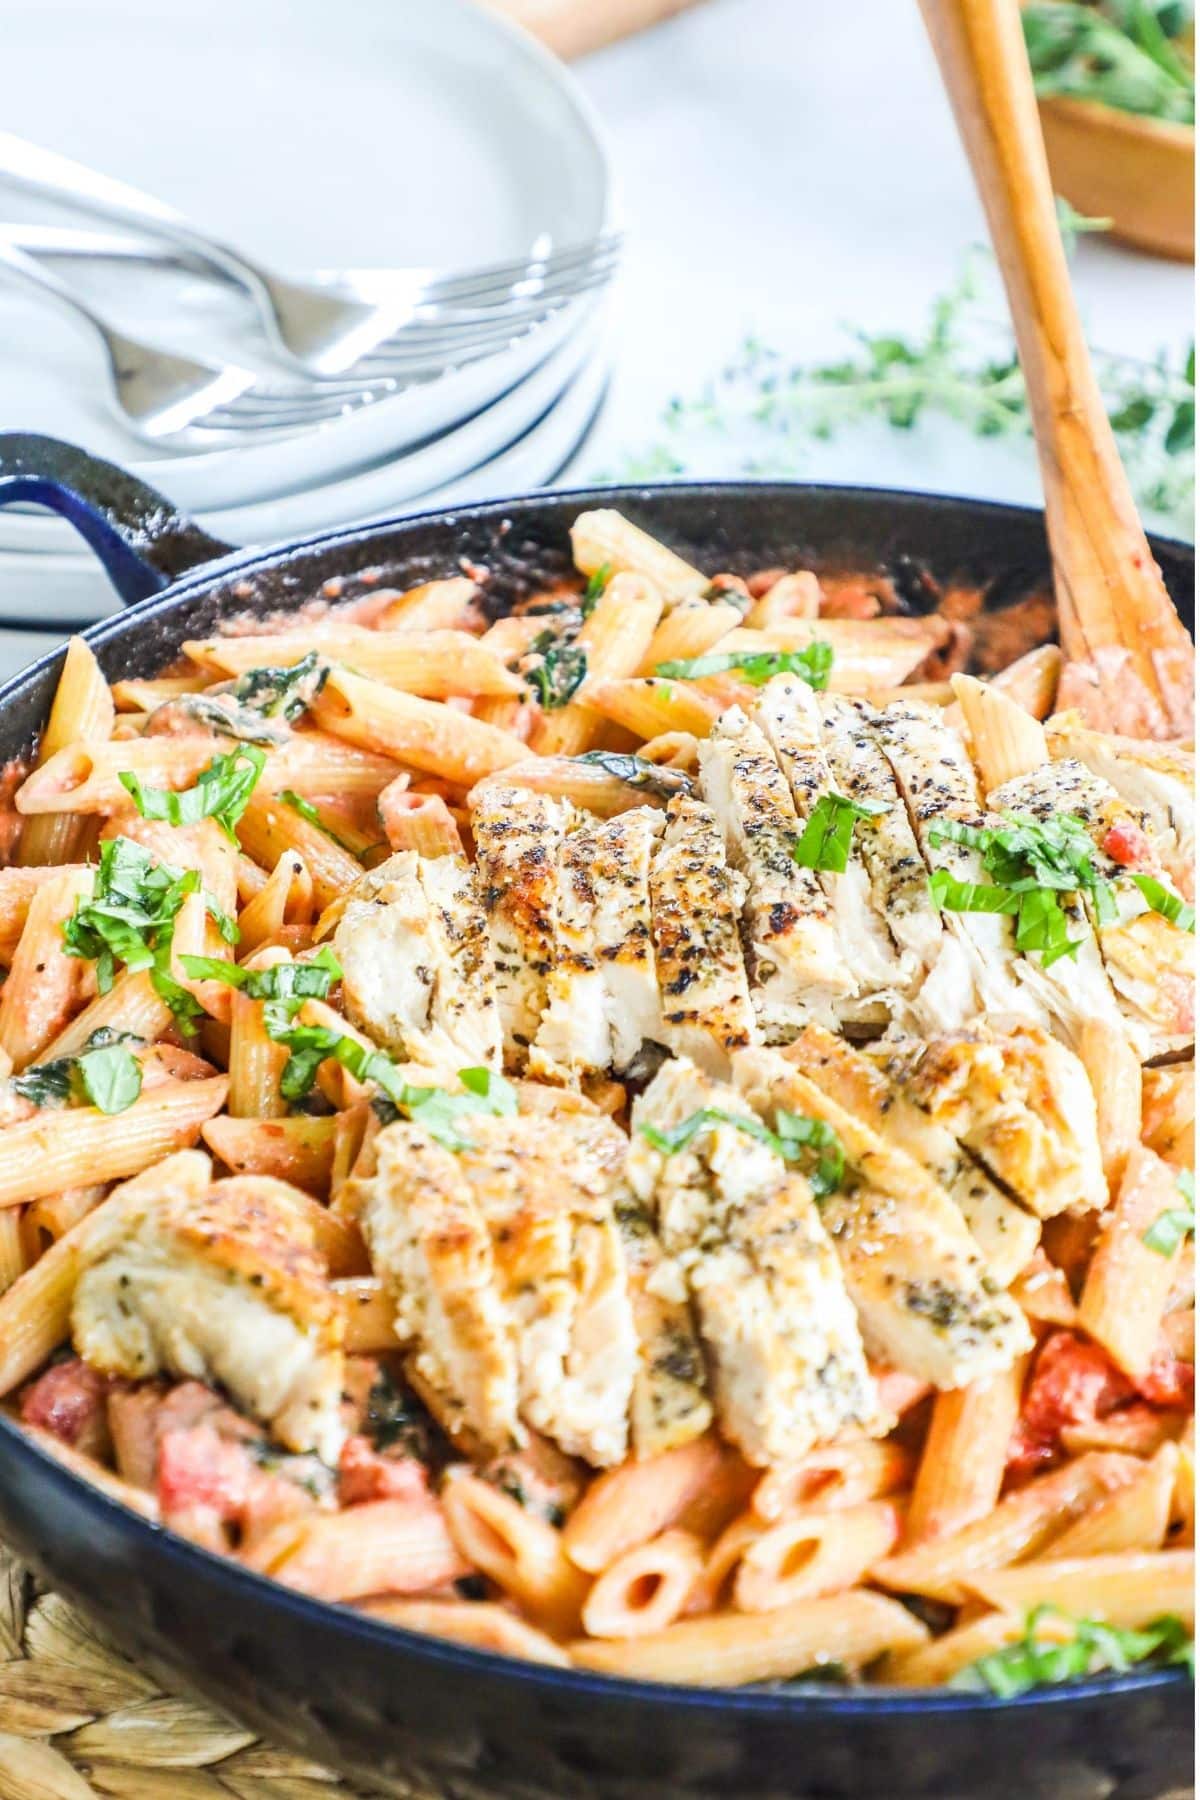 tomato basil pasta in a skillet topped with chicken cutlet slices